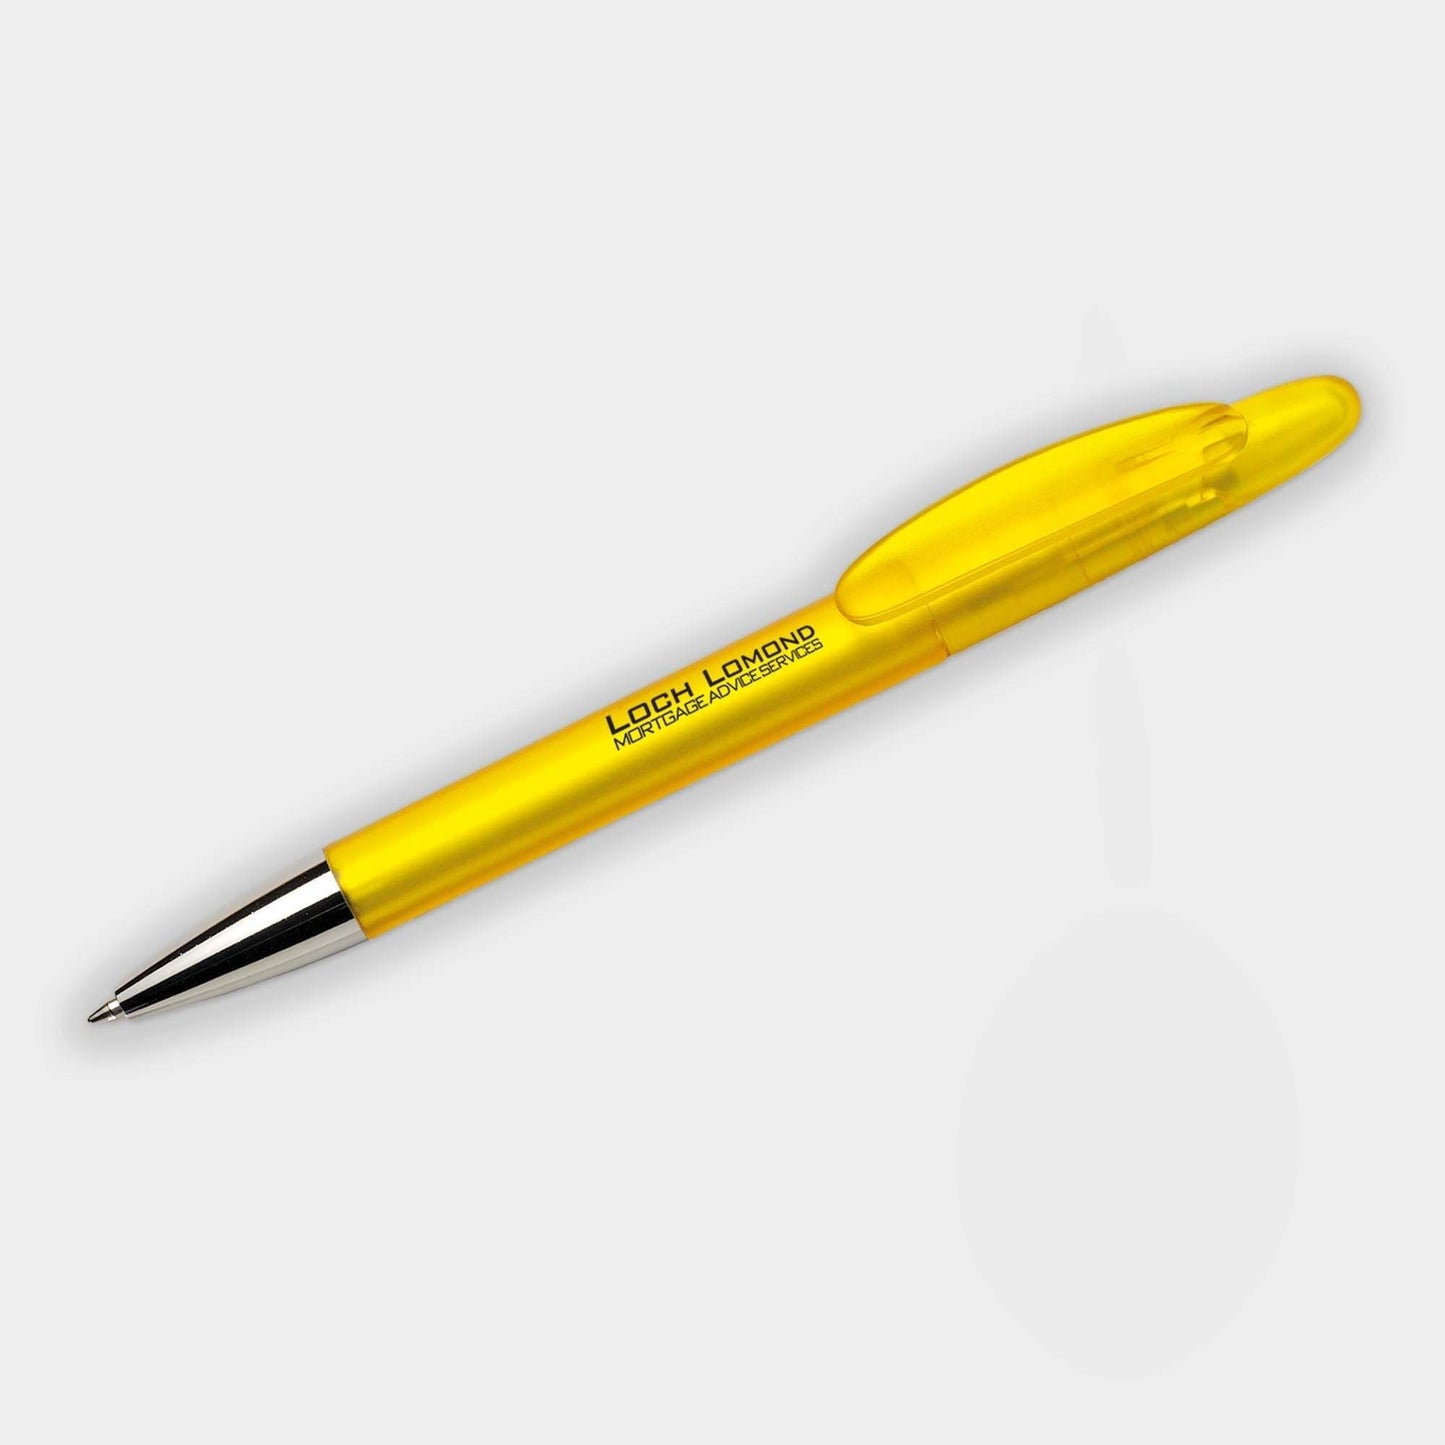 Frosted Biodegradable Pen - Promotions Only Group Limited